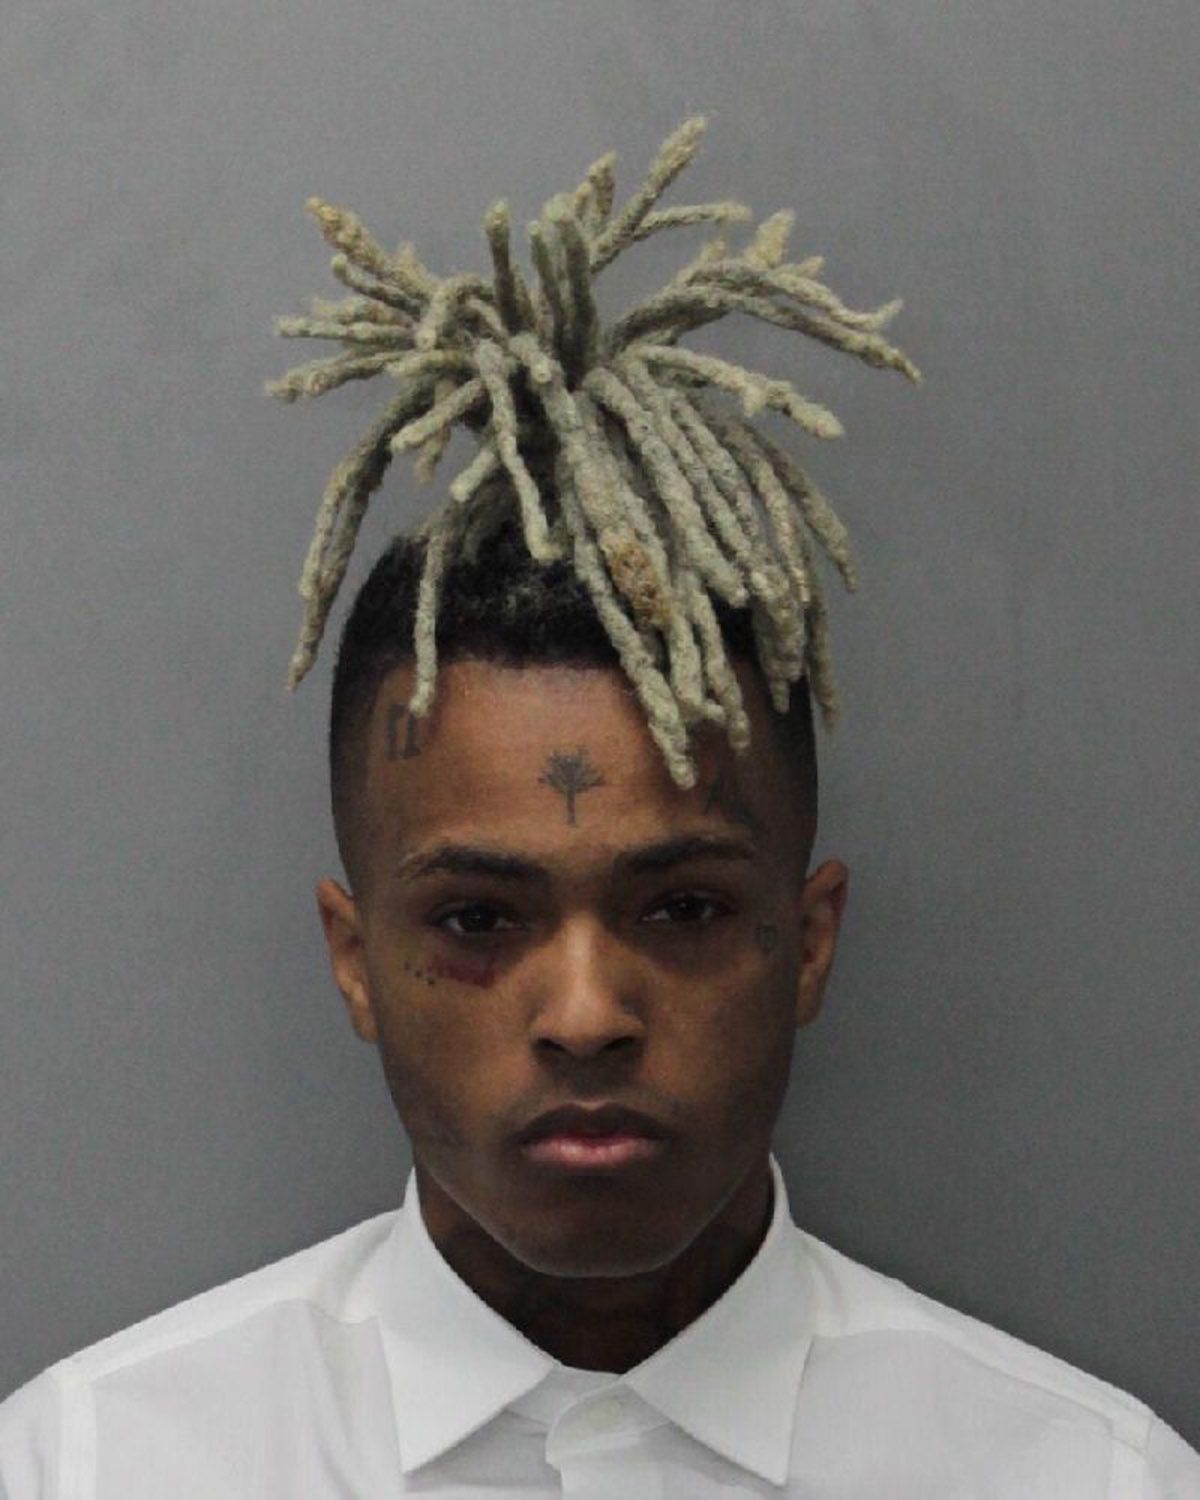 XXXTentacion, also known as Jahseh Dwayne Onfroy poses for his mugshot after being charged with seven new felonies stemming from a 2016 domestic violence case on December 15, 2017 in Miami, Florida. | Source: Getty Images